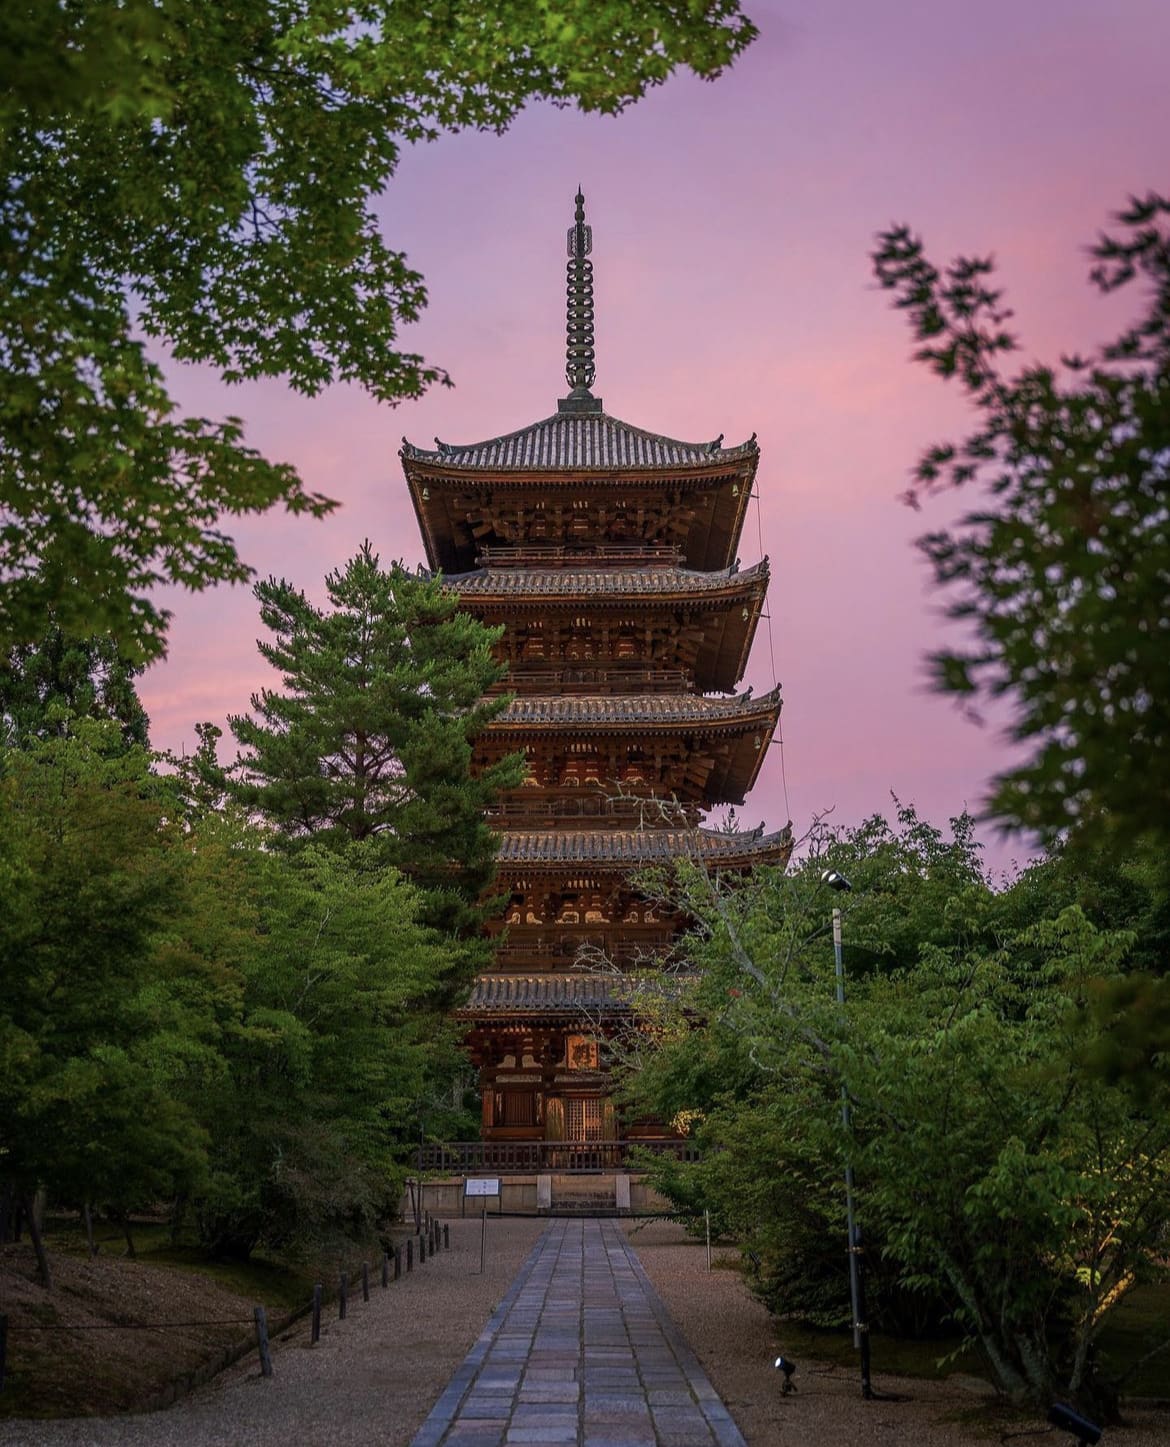 Ninnaji Temple, Kyoto - How To Spend 7 Days In Japan